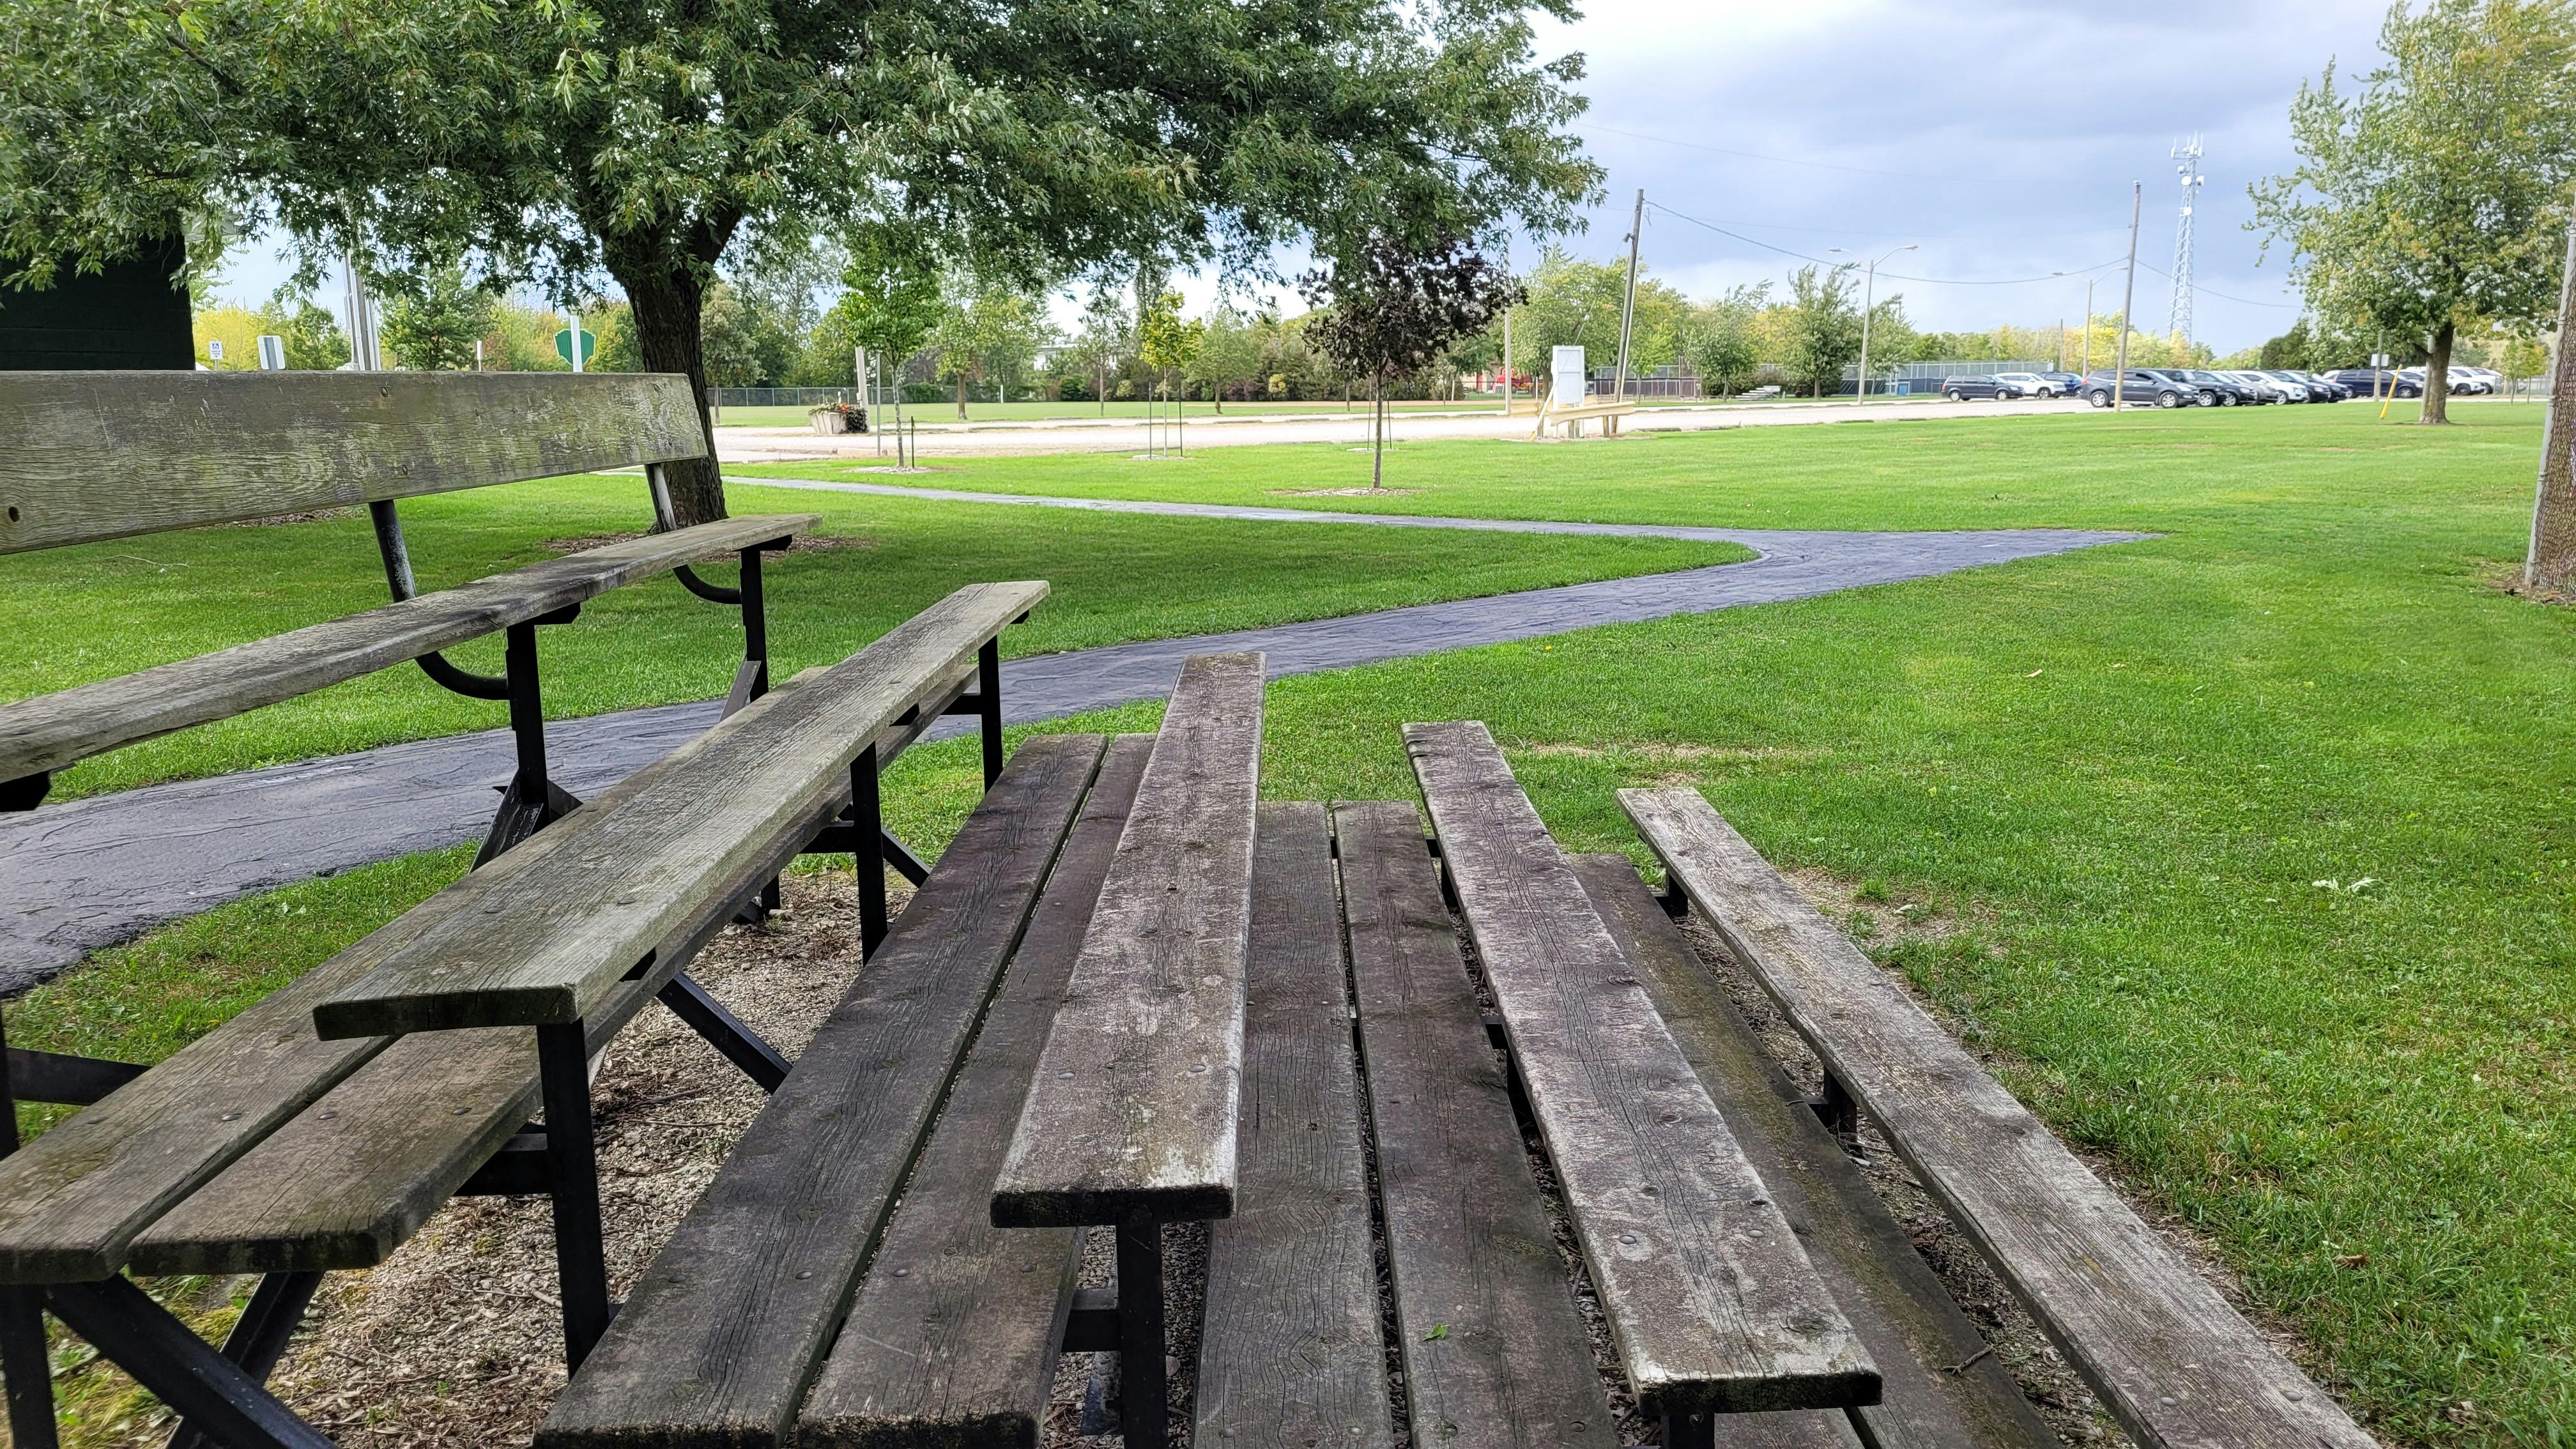 Existing spectator bleacher and open space